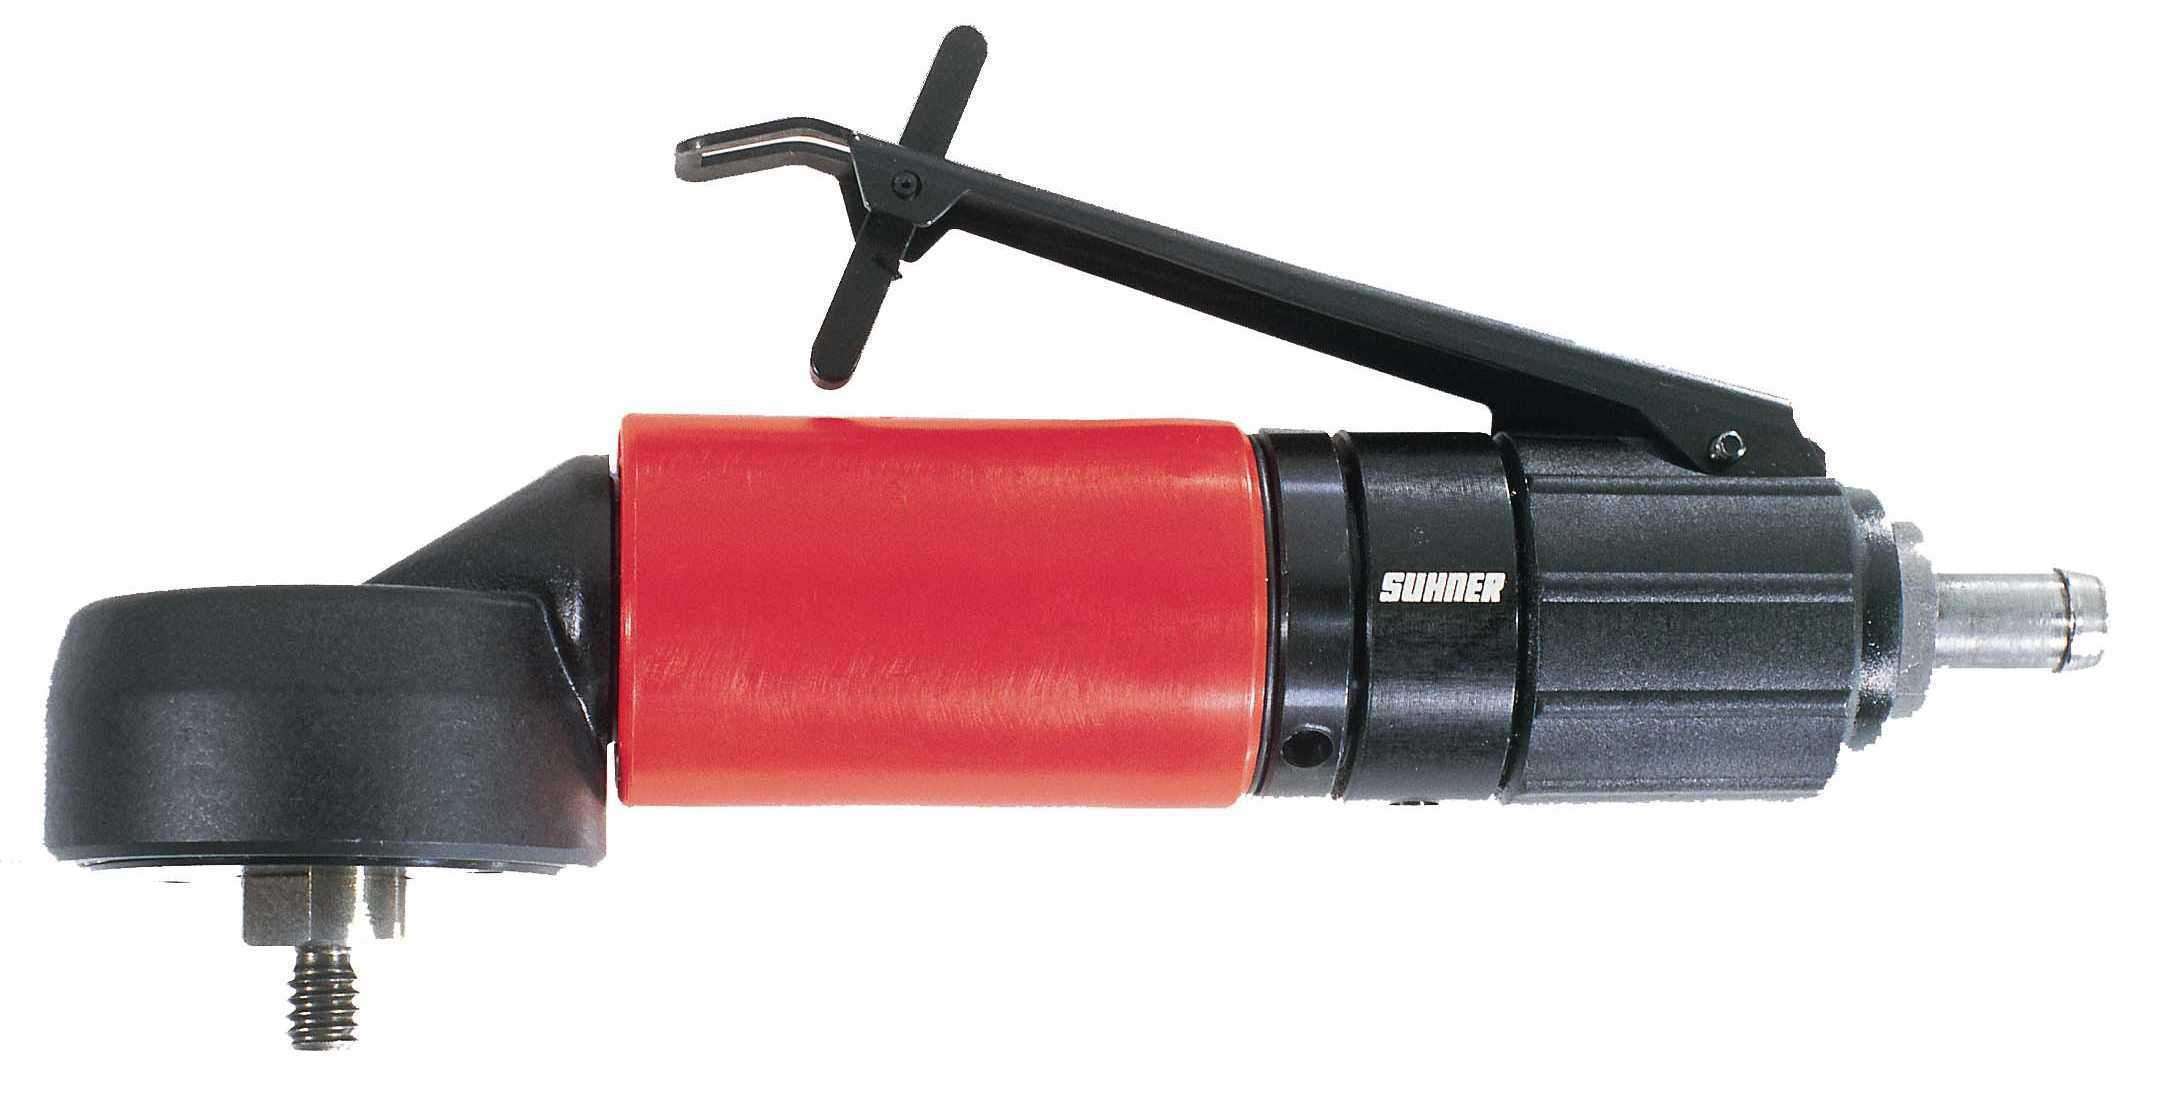 Suhner LPB 12 DH Angle Grinder Multi-Functional Lever Ring Throttle 12000 RPM